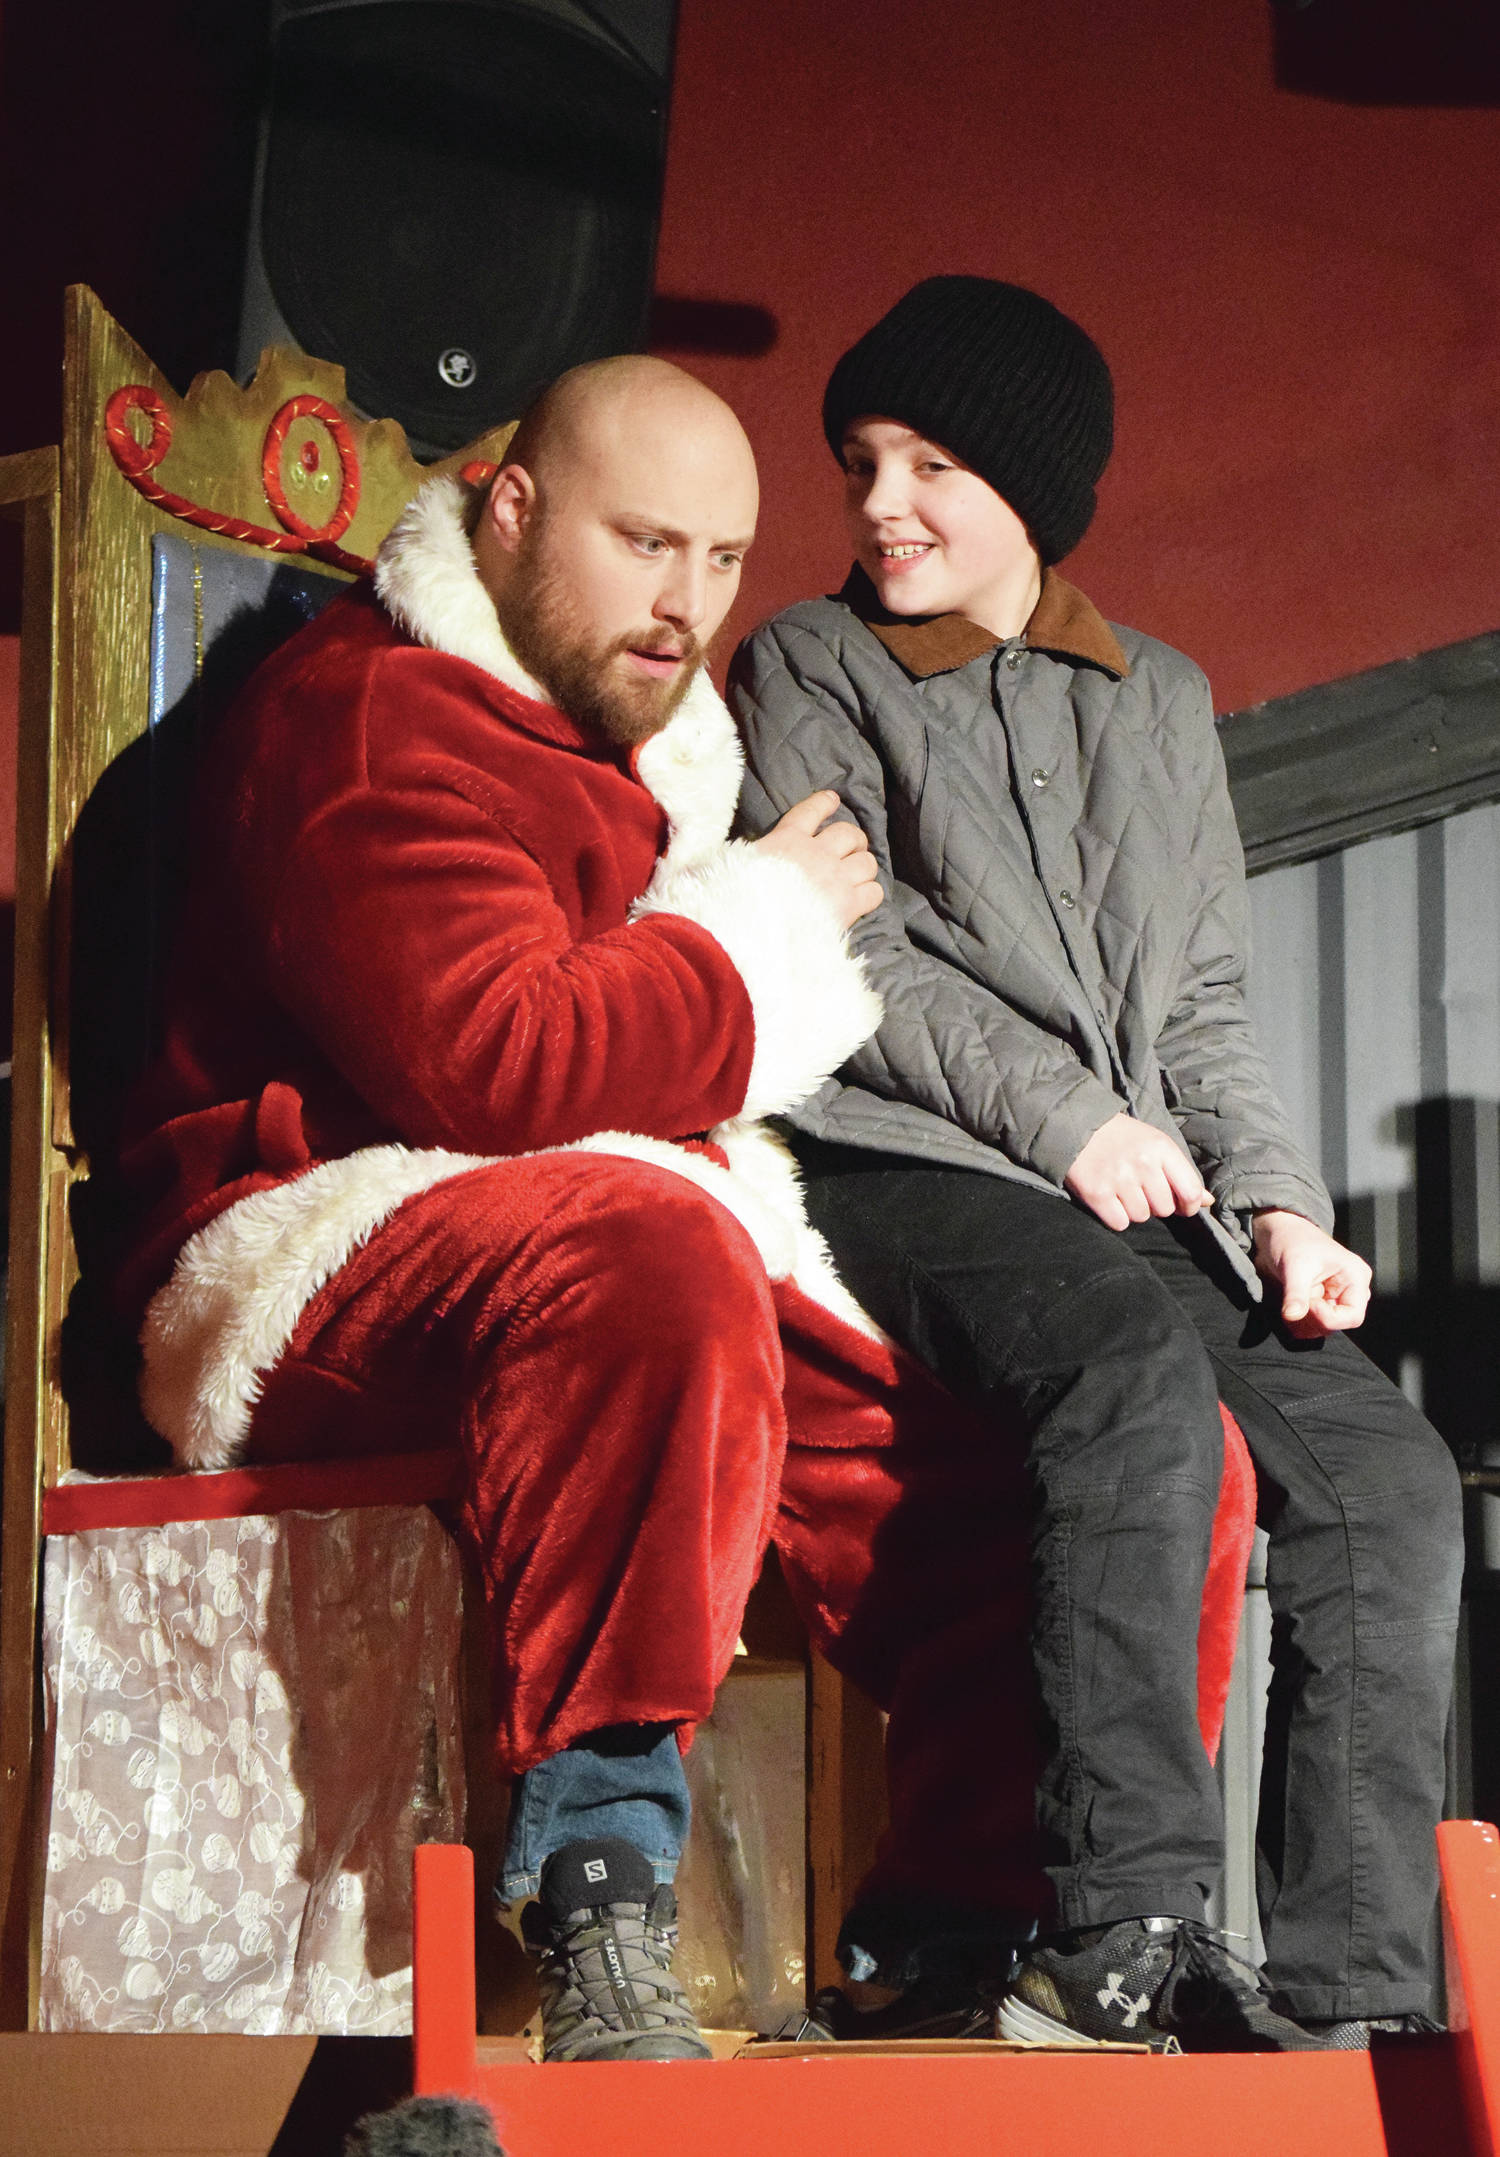 Tyler Payment (left) acts out a scene with a young actor Tuesday, Dec. 17, 2019, at a rehearsal of “A Christmas Story” by the Triumvirate Theatre North in Kenai, Alaska. (Photo by Joey Klecka/Peninsula Clarion)